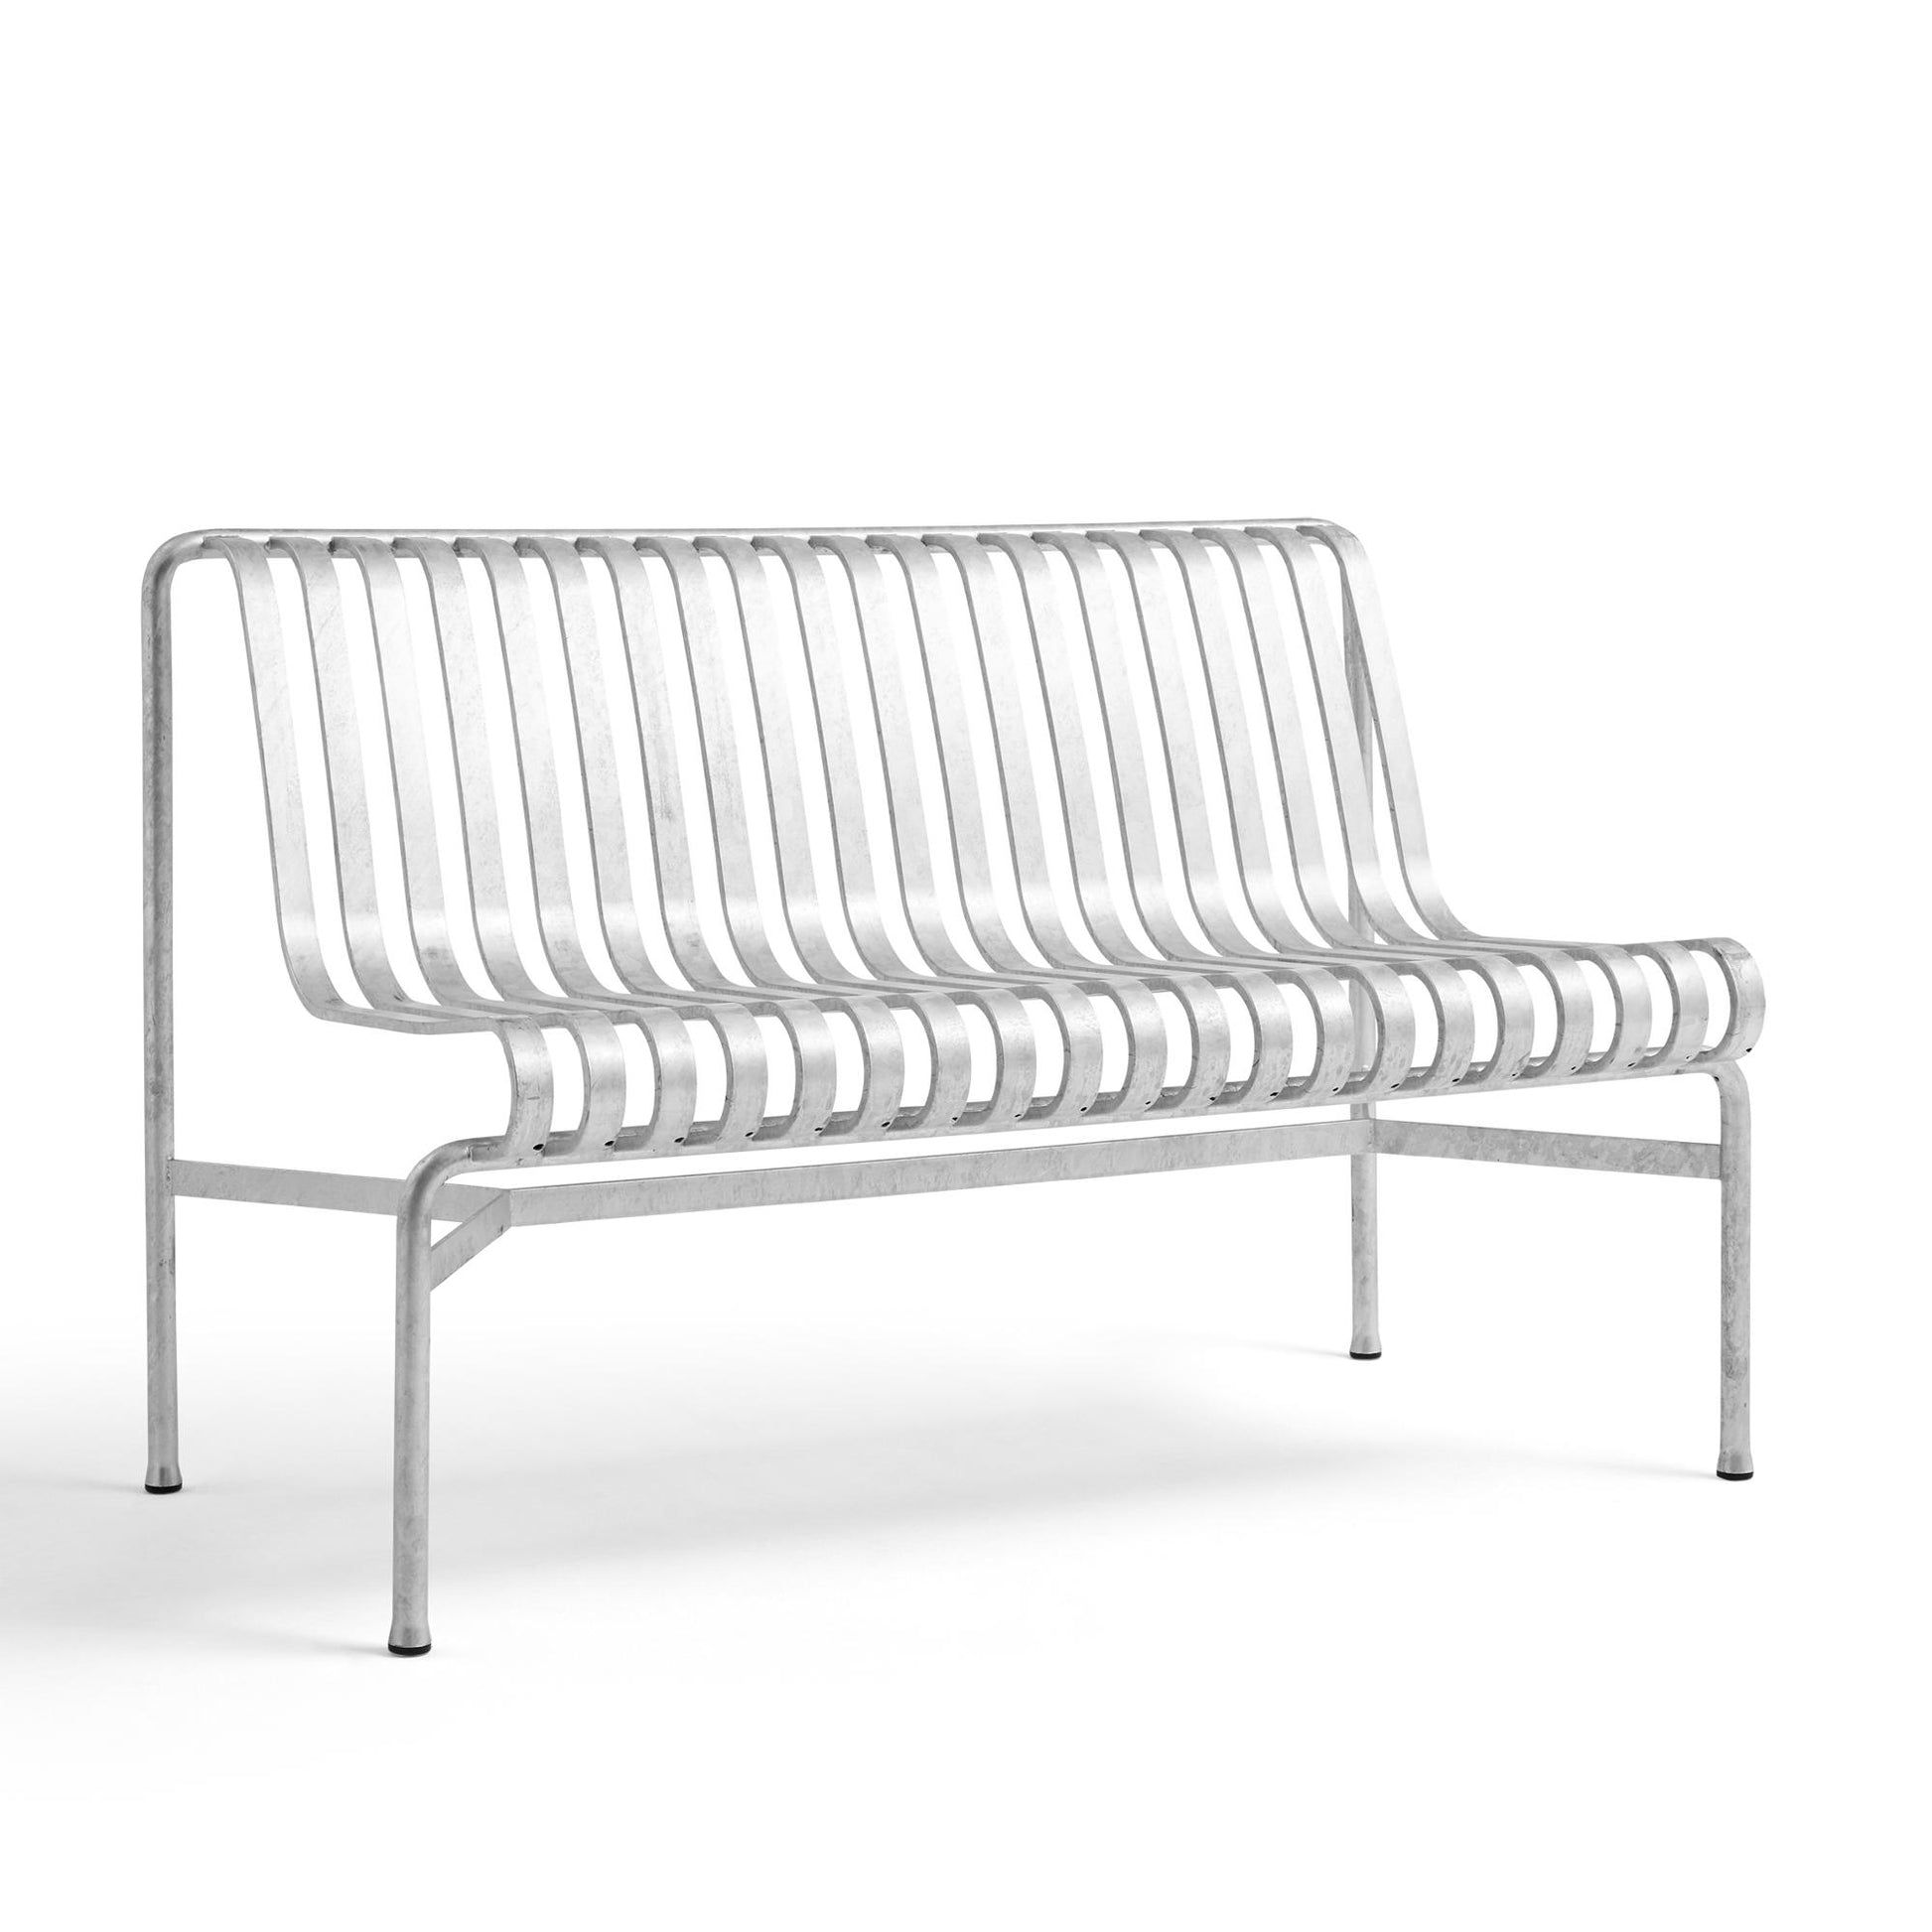 Palissade Dining Bench by HAY #Hot Galvanized Steel